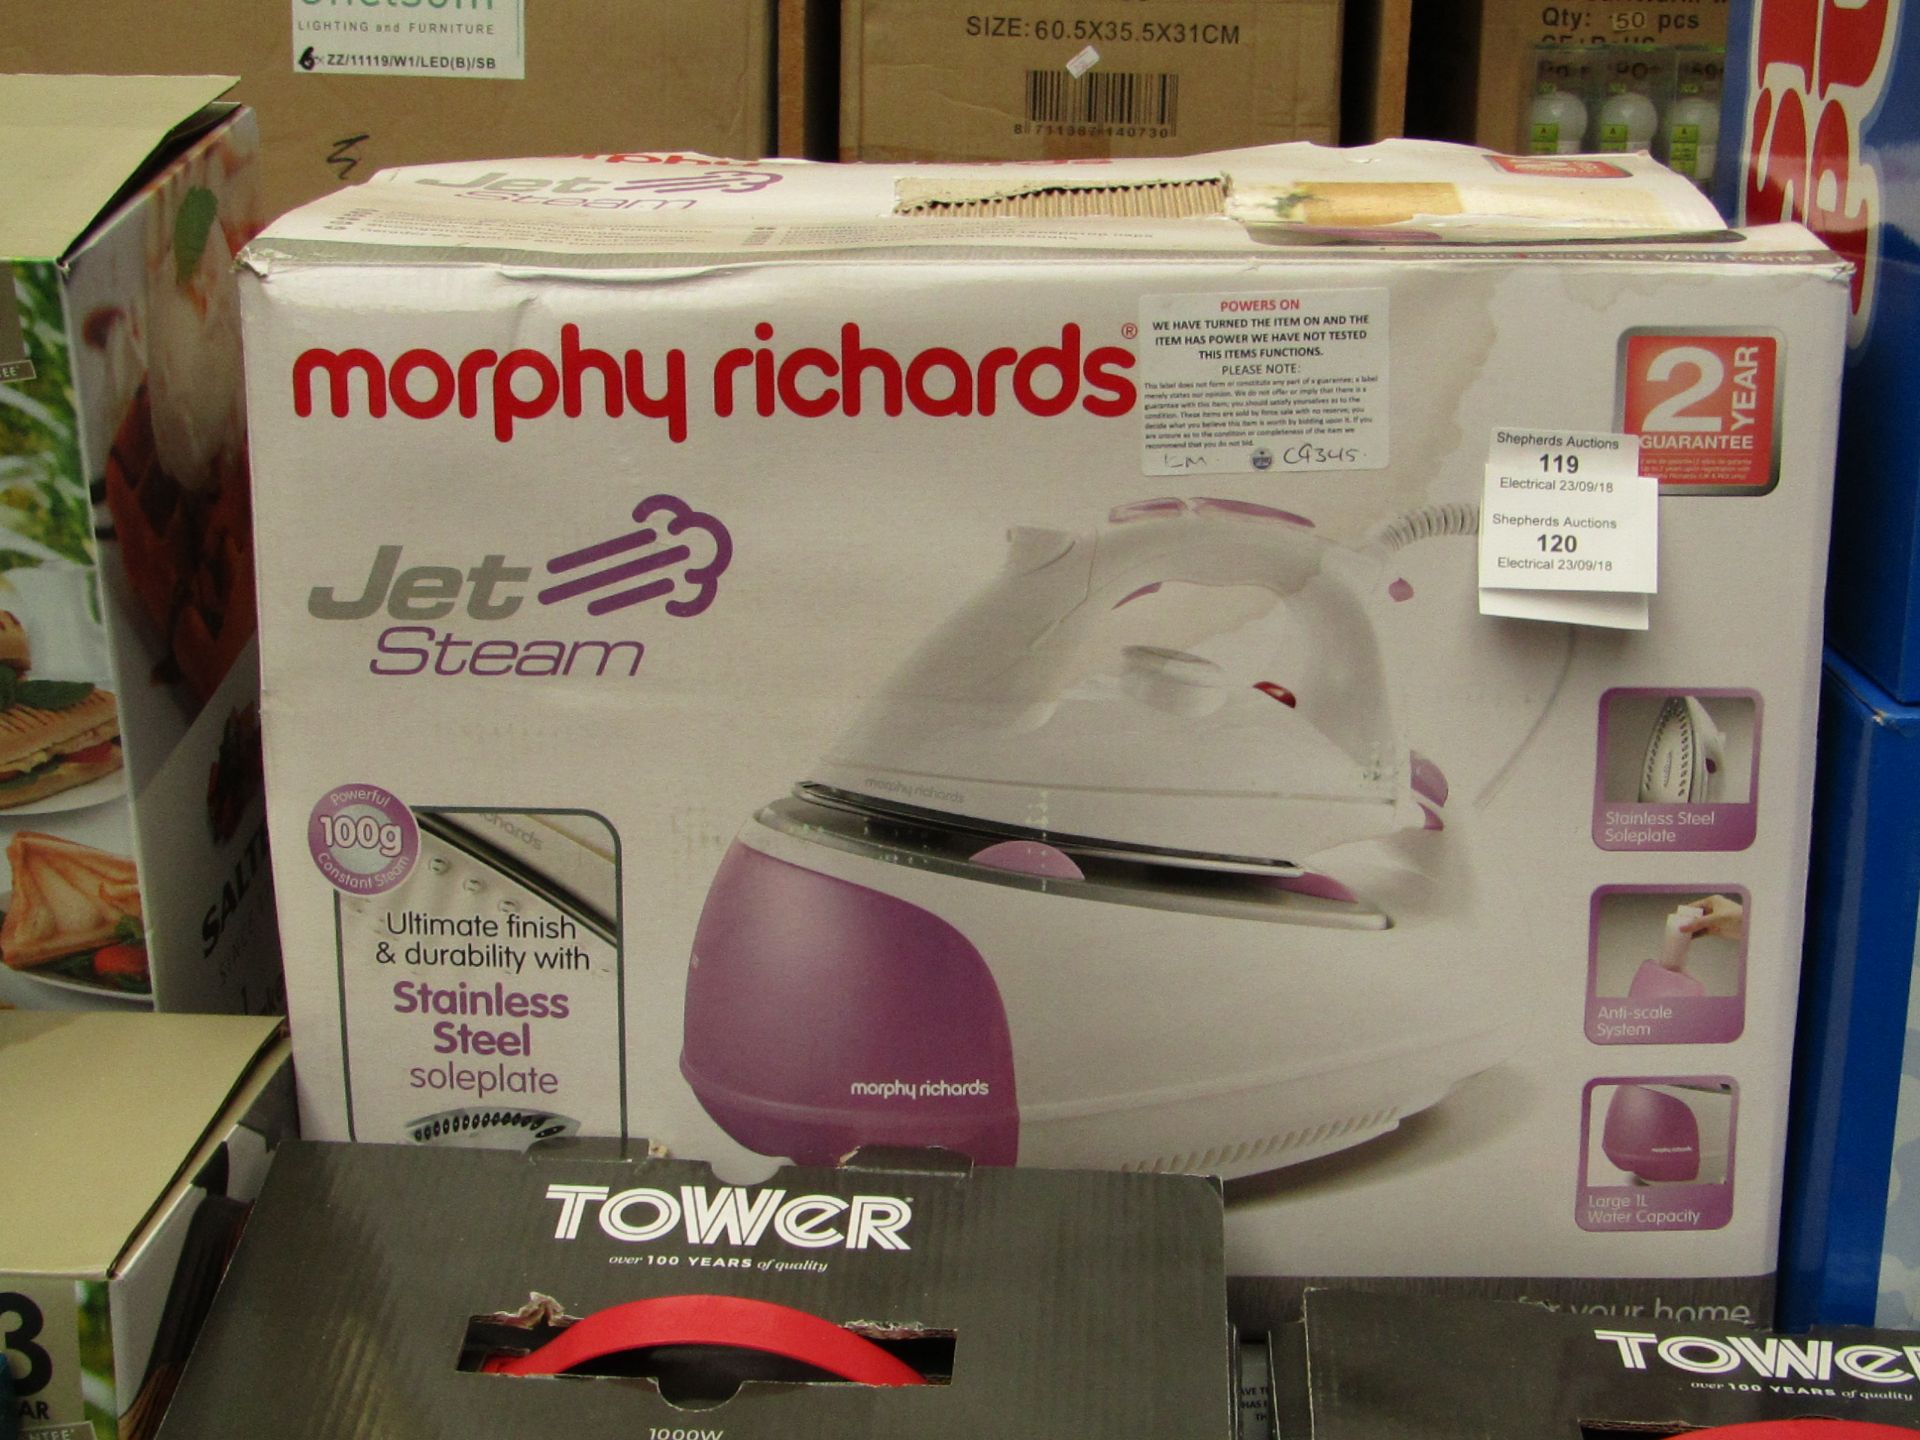 Morphy Richards Jet Steam generator iron, powers on and in damaged packaging.